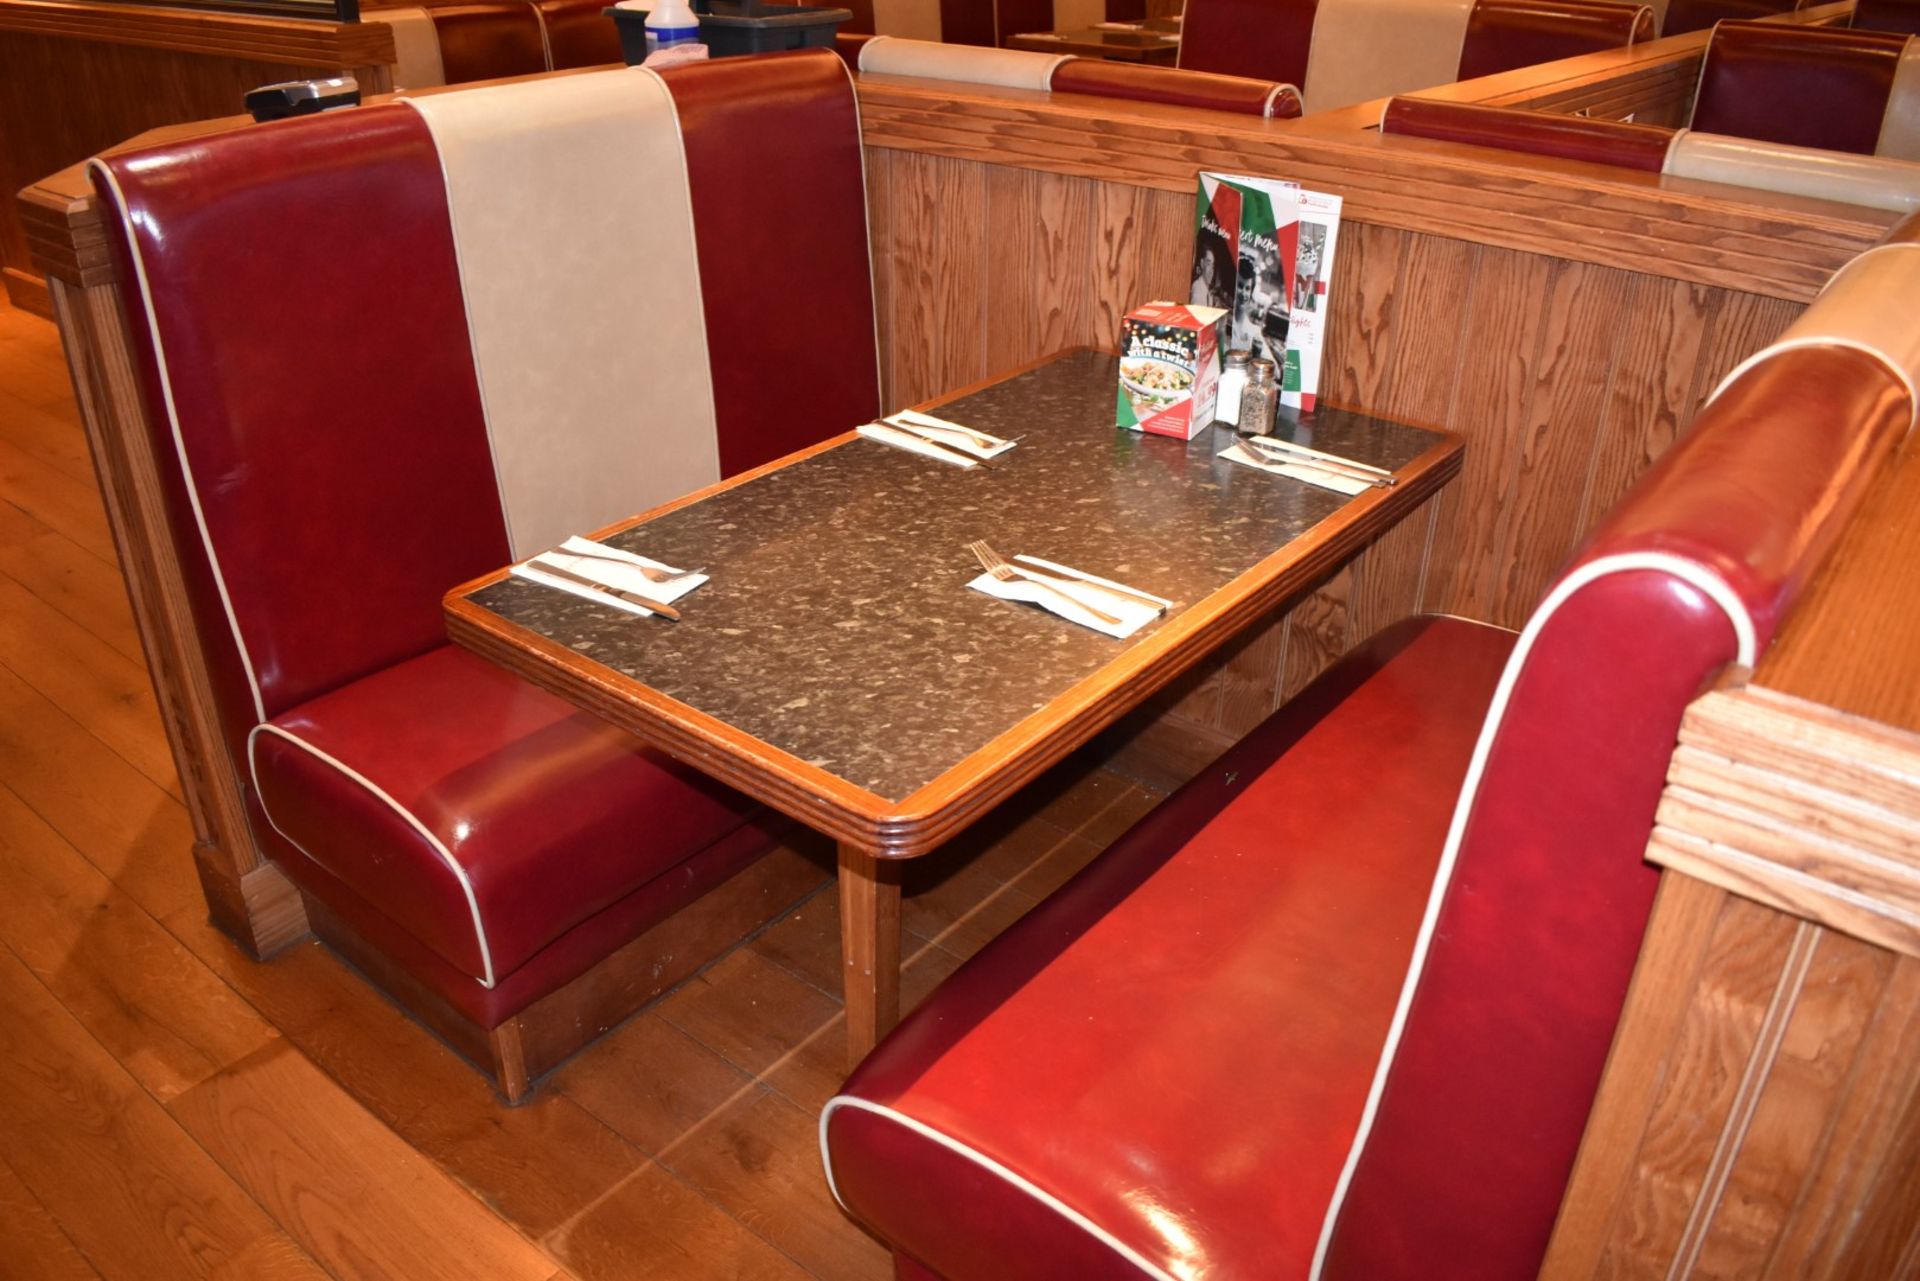 2 x Double Seating Booths and 1 x Table - Upholstered in a Red and Cream Retro Style Faux Leather - Image 2 of 5